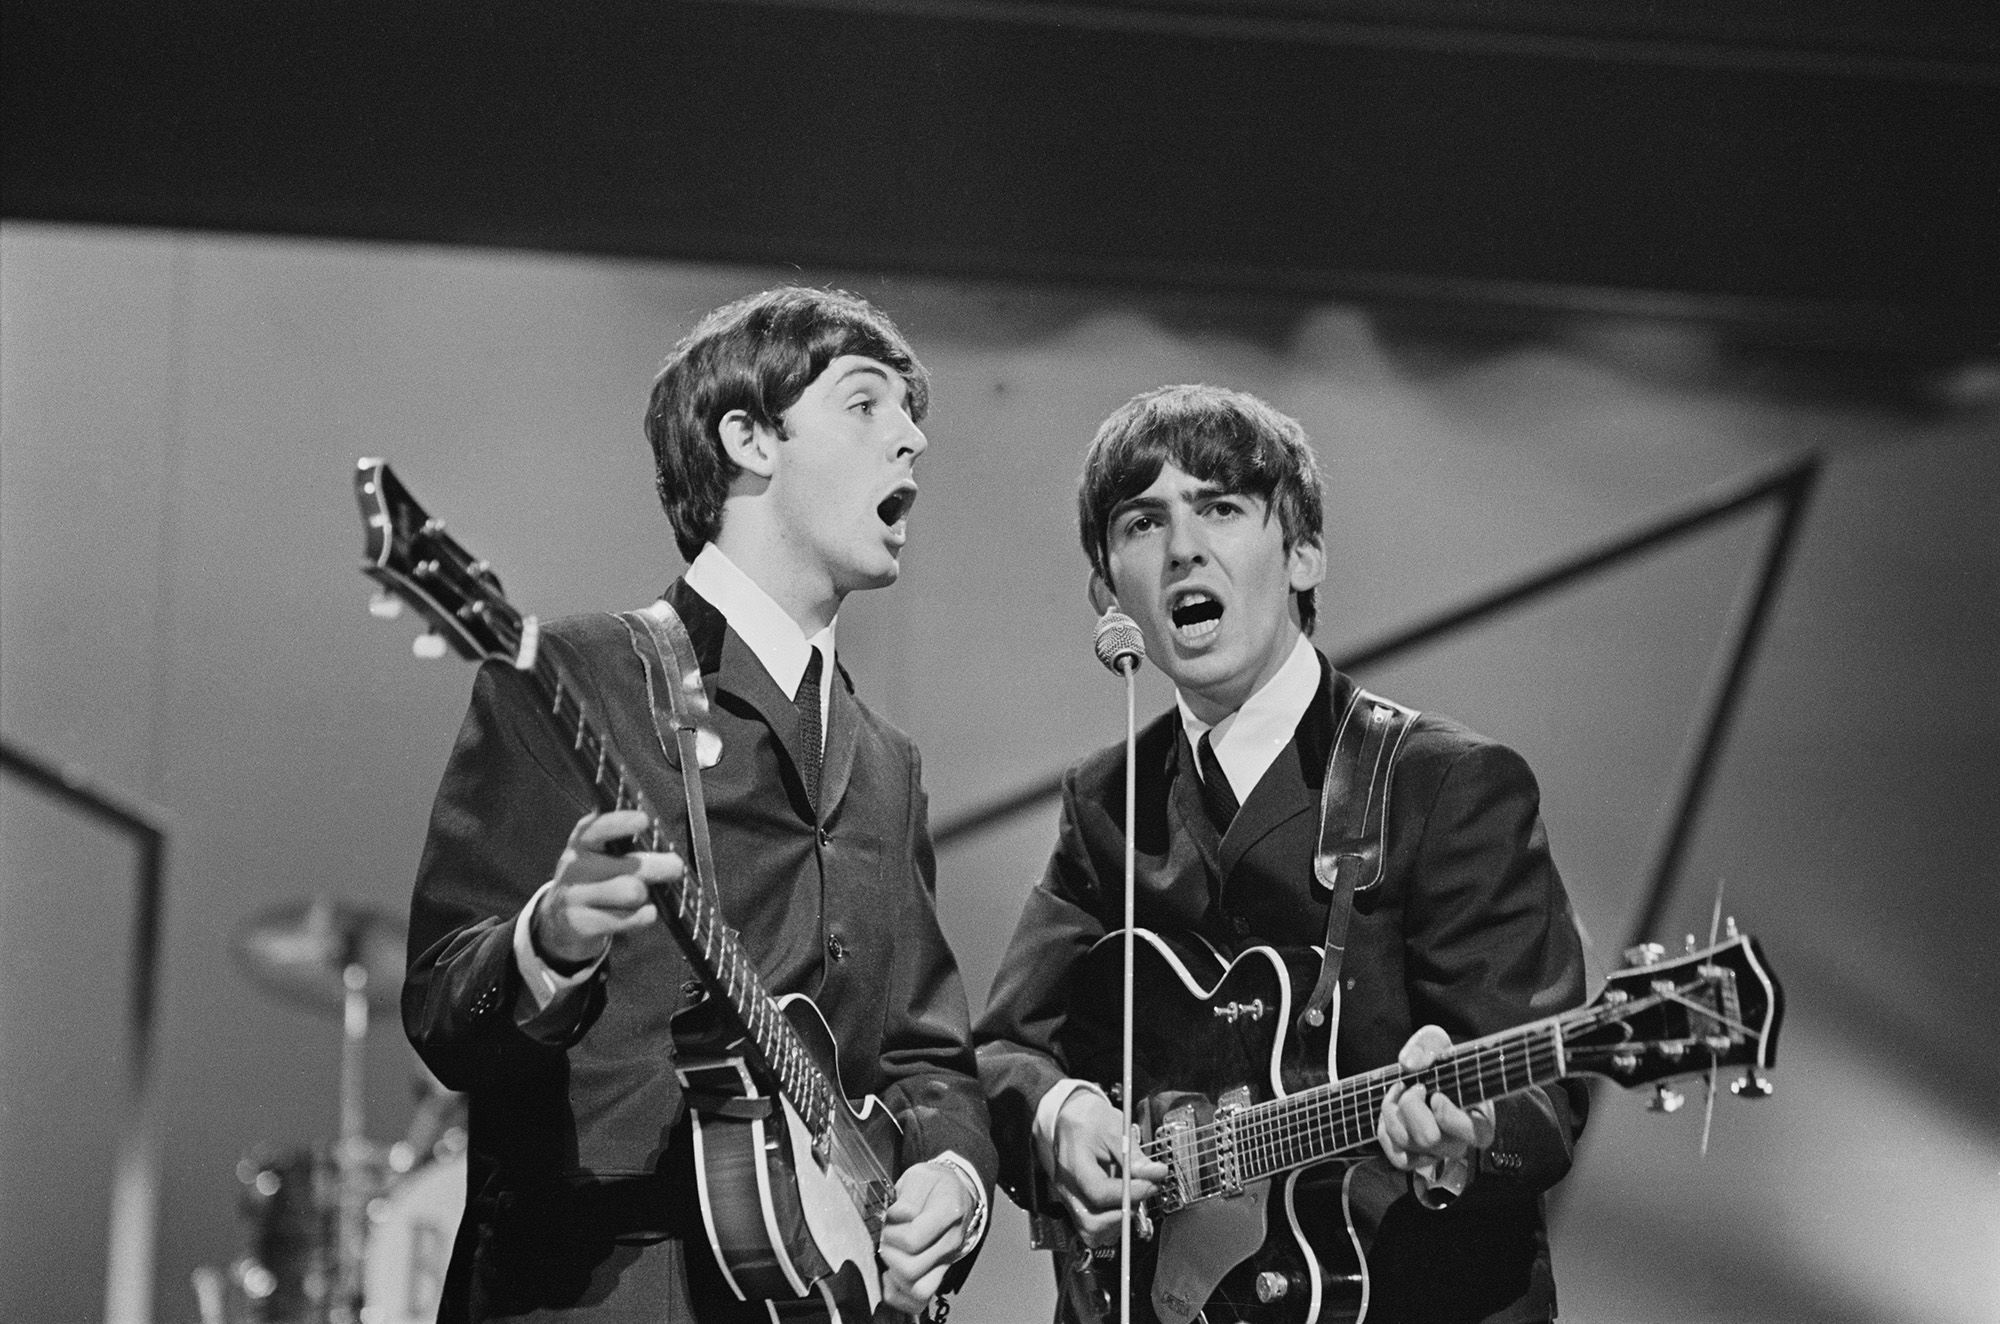 Paul McCartney played the distinctive bass guitar during The Beatles' early success.